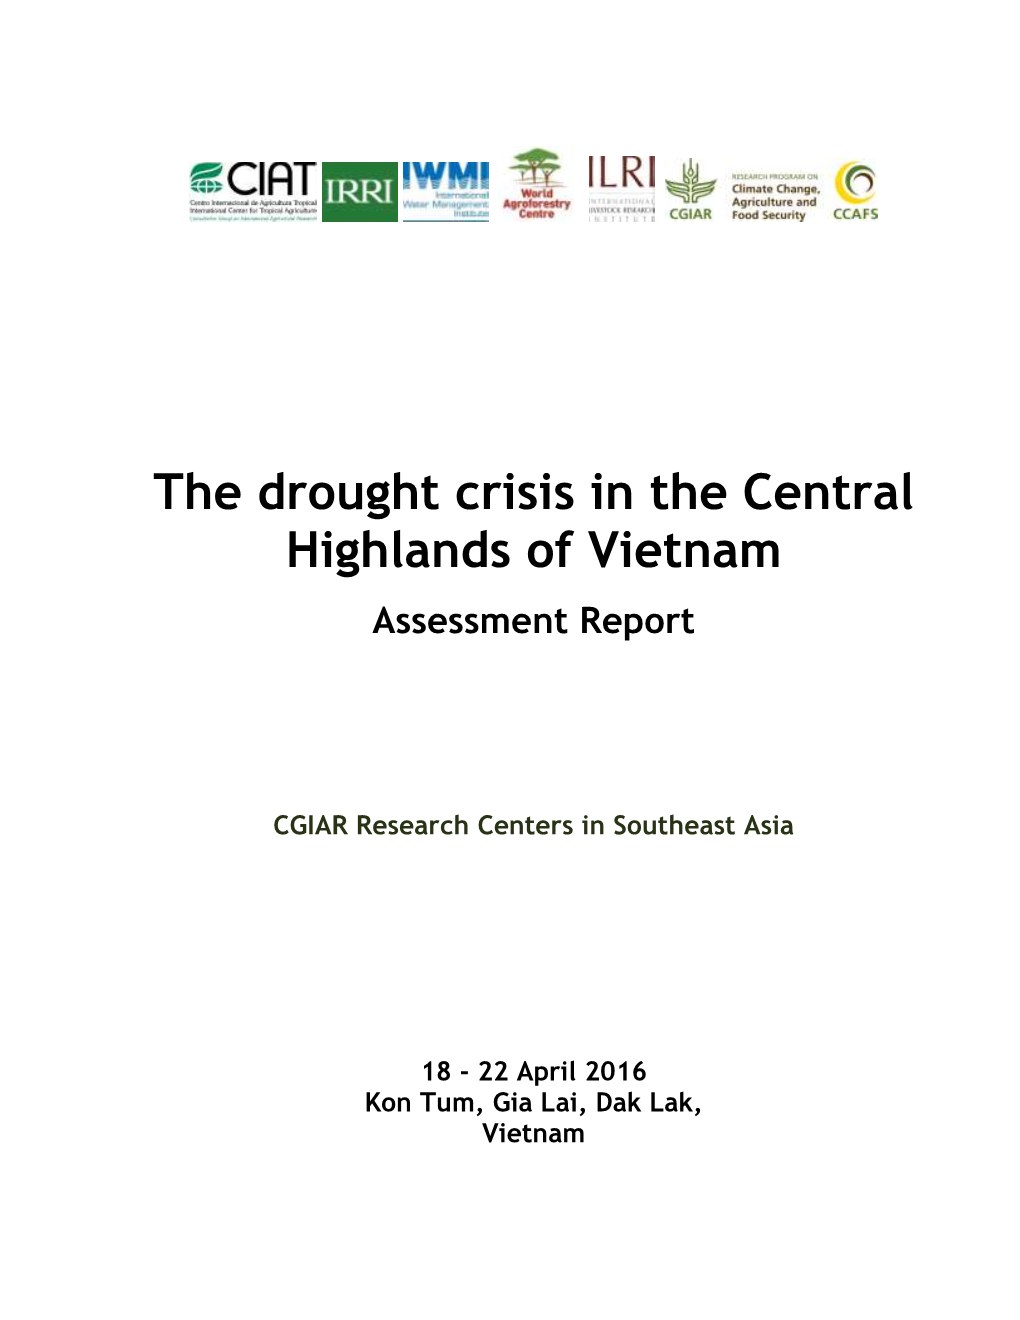 The Drought Crisis in the Central Highlands of Vietnam Assessment Report